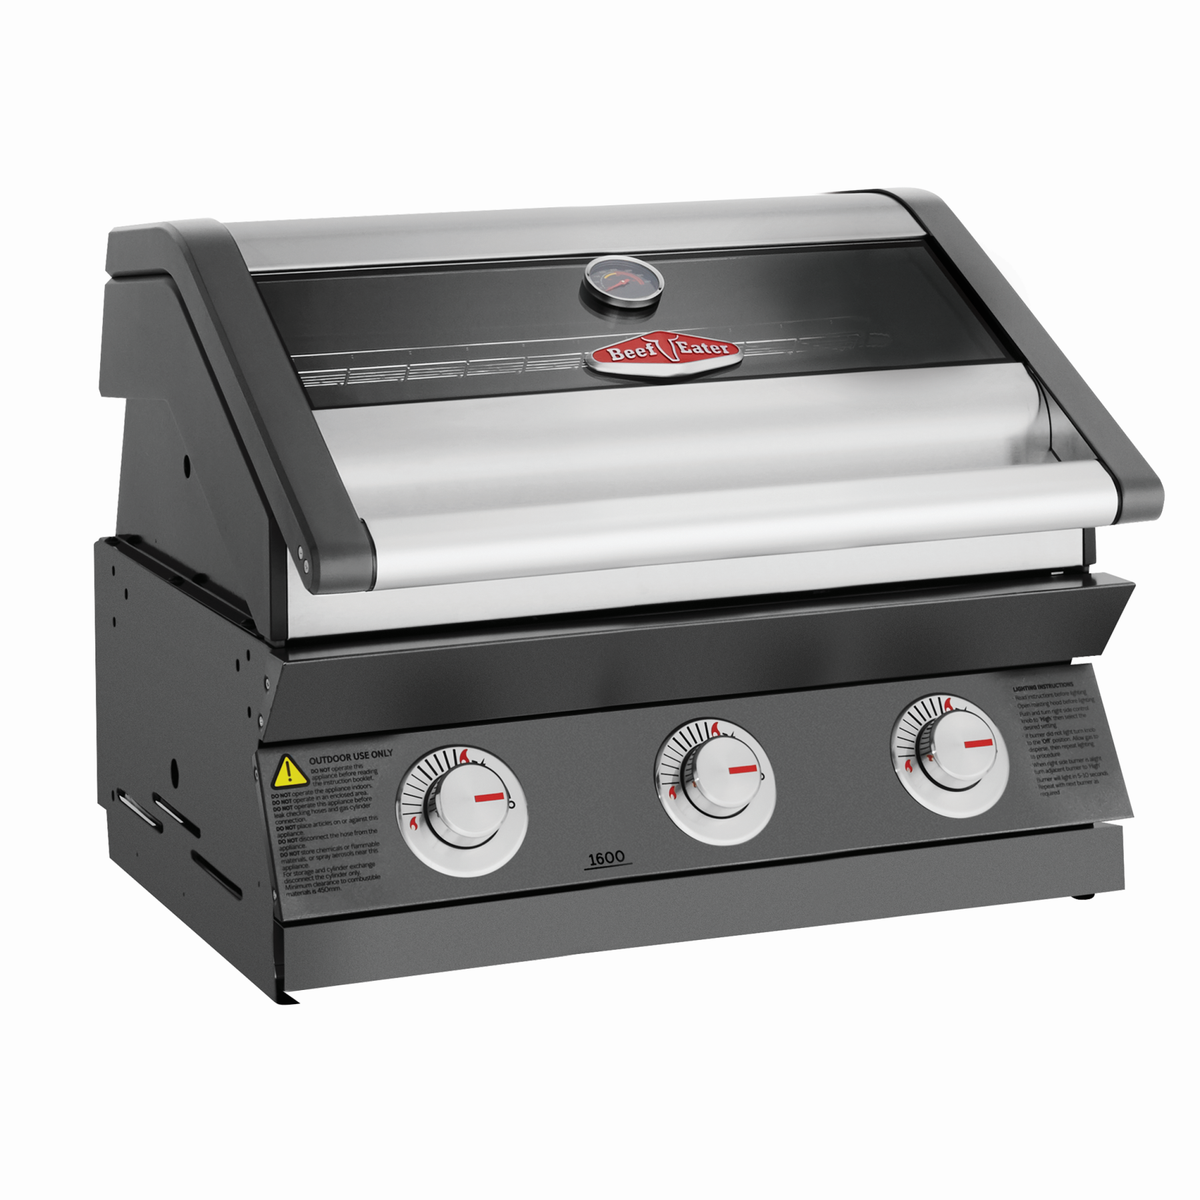 BeefEater 1600E Series 3 Burner Build In Gas Barbecue